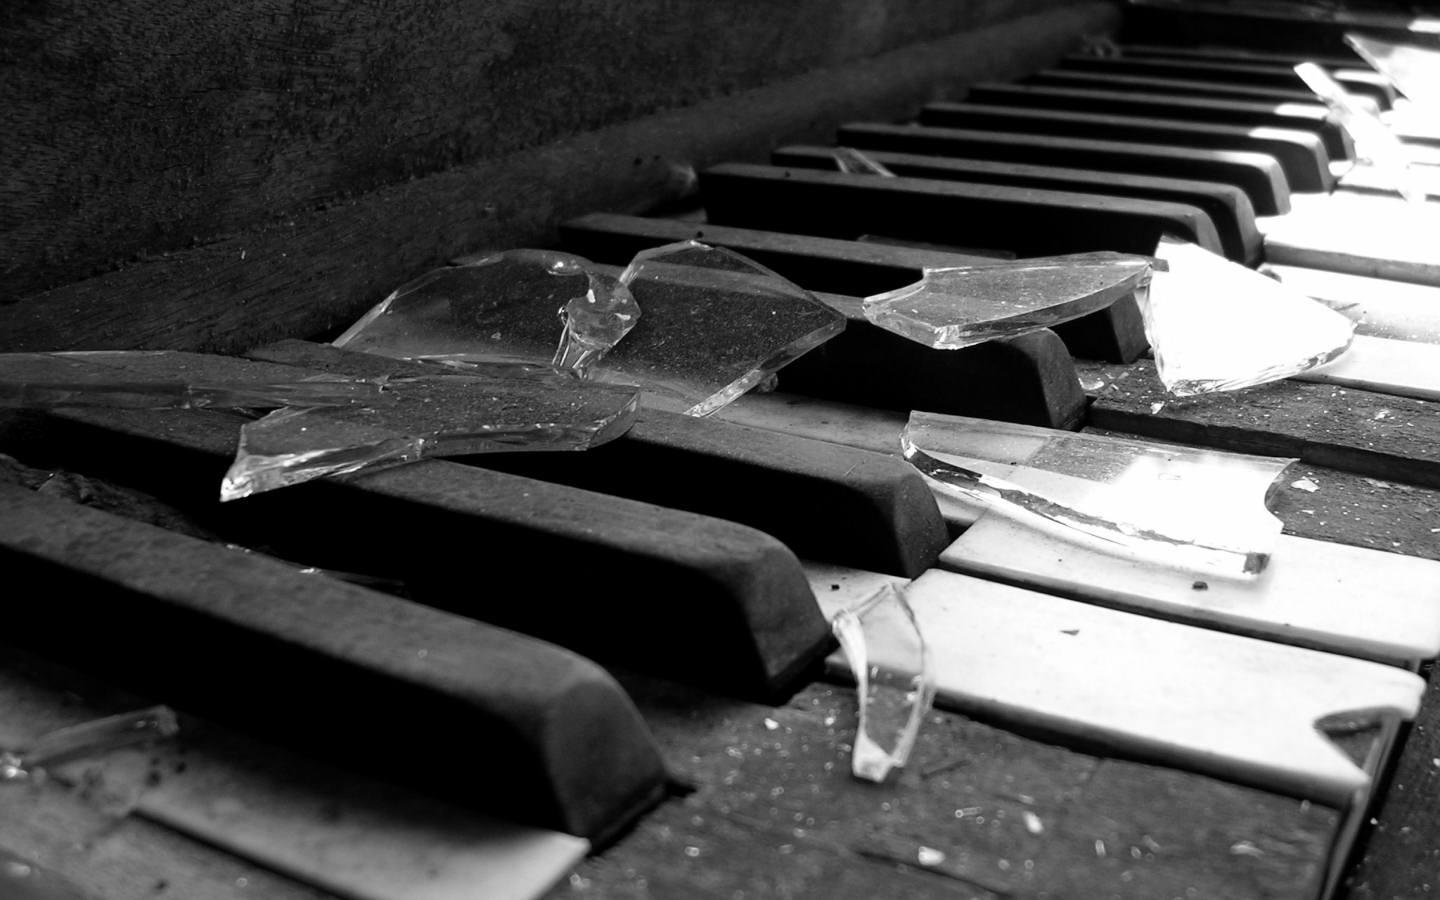 Piano Wallpapers